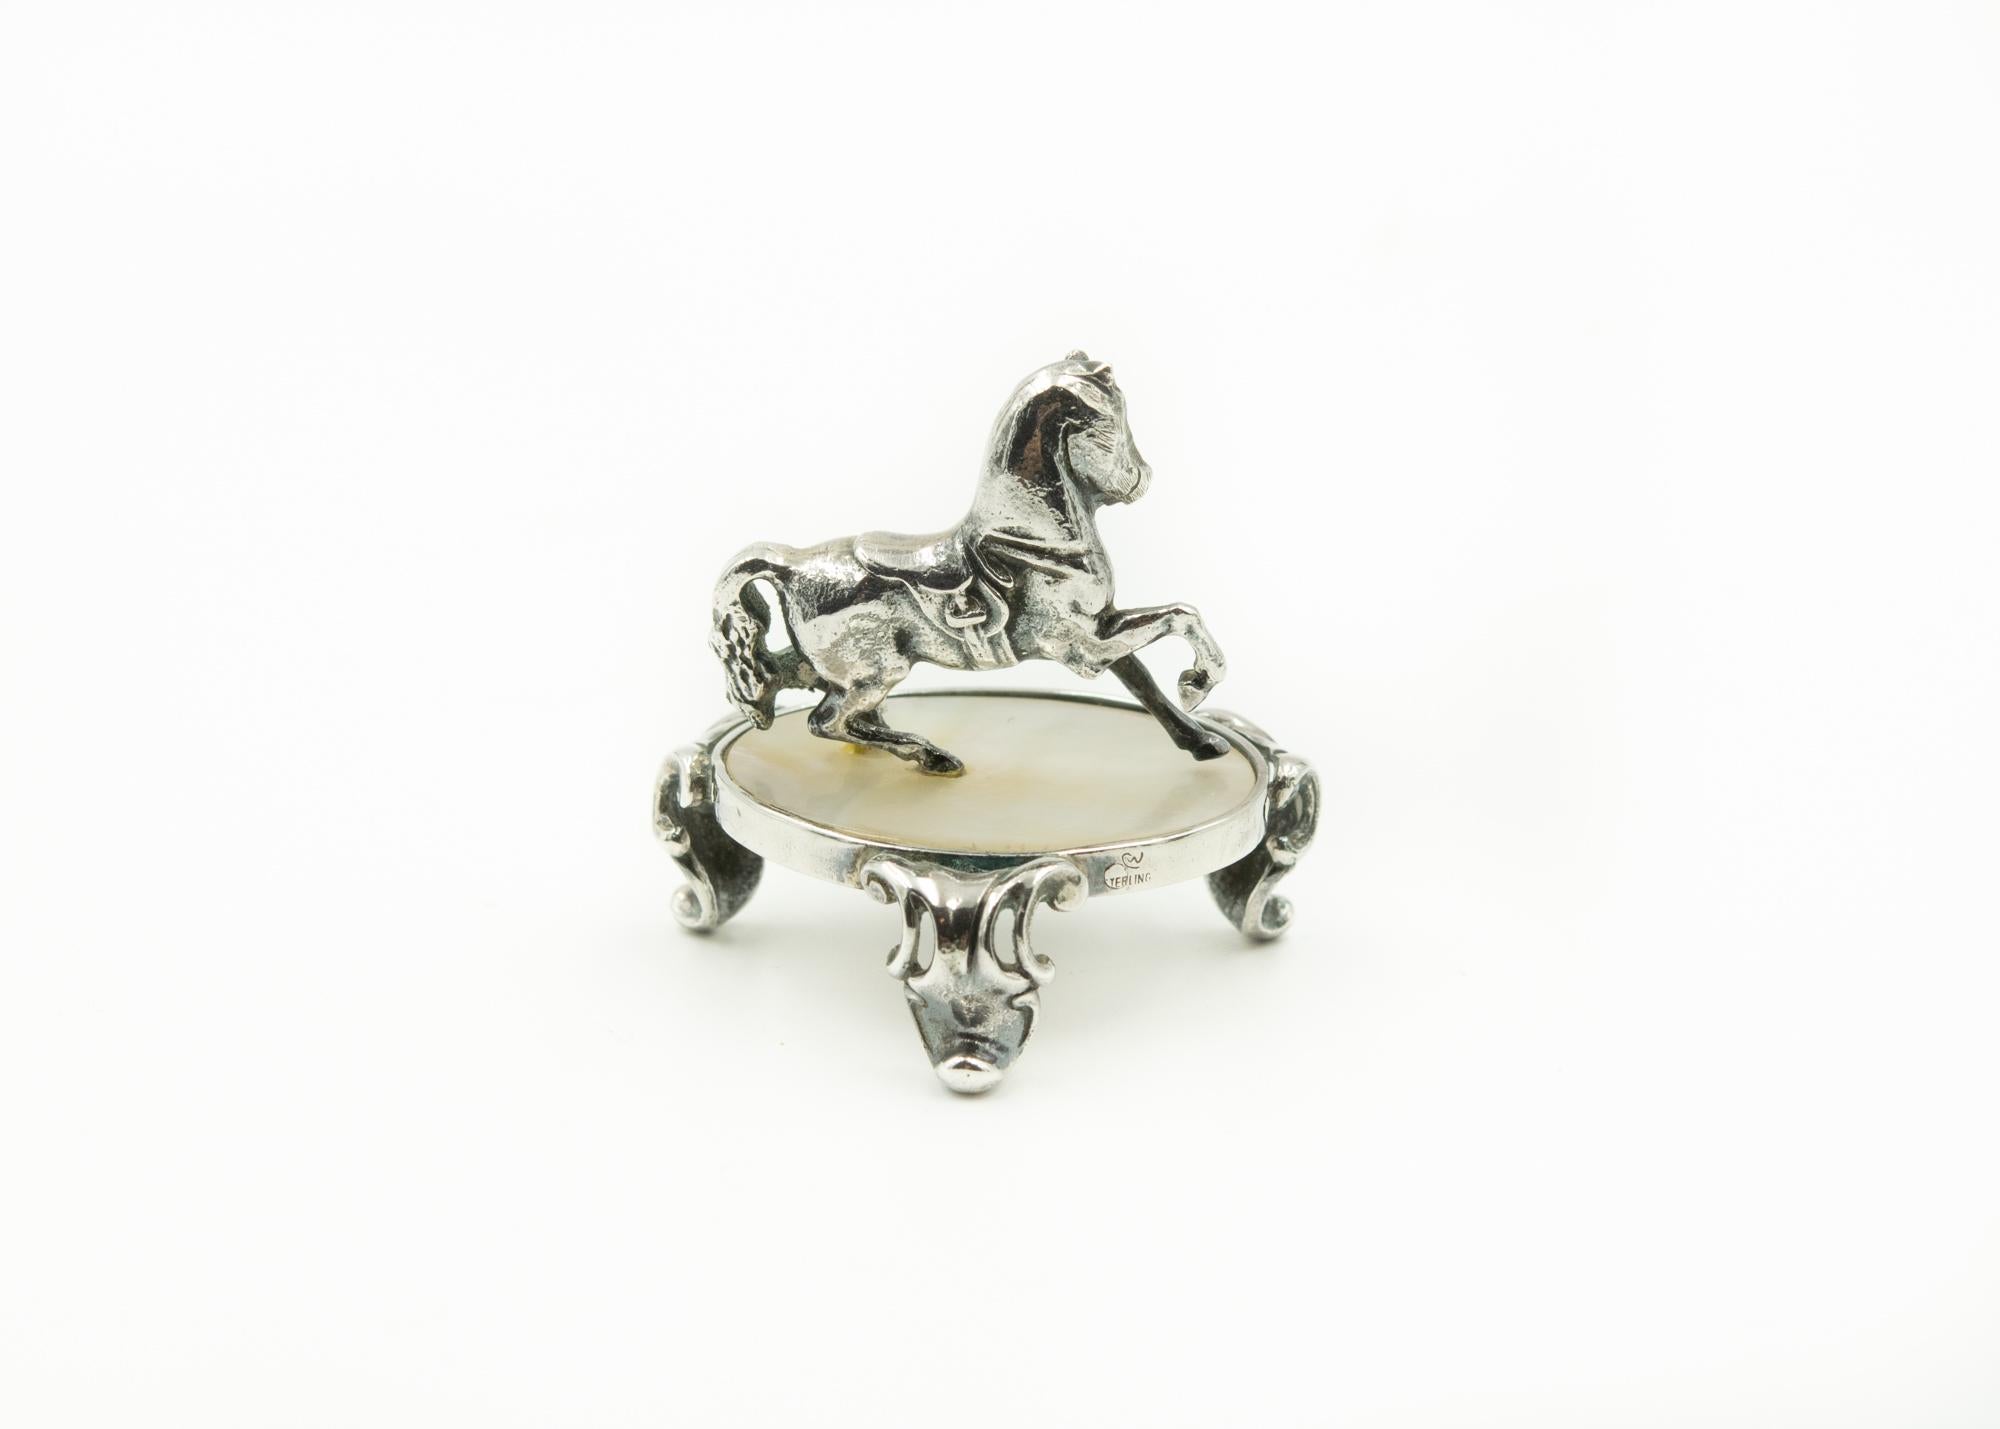 North American Rare Miniature Horse Sterling Silver and Mother of Pearl Sculpture by Watrous